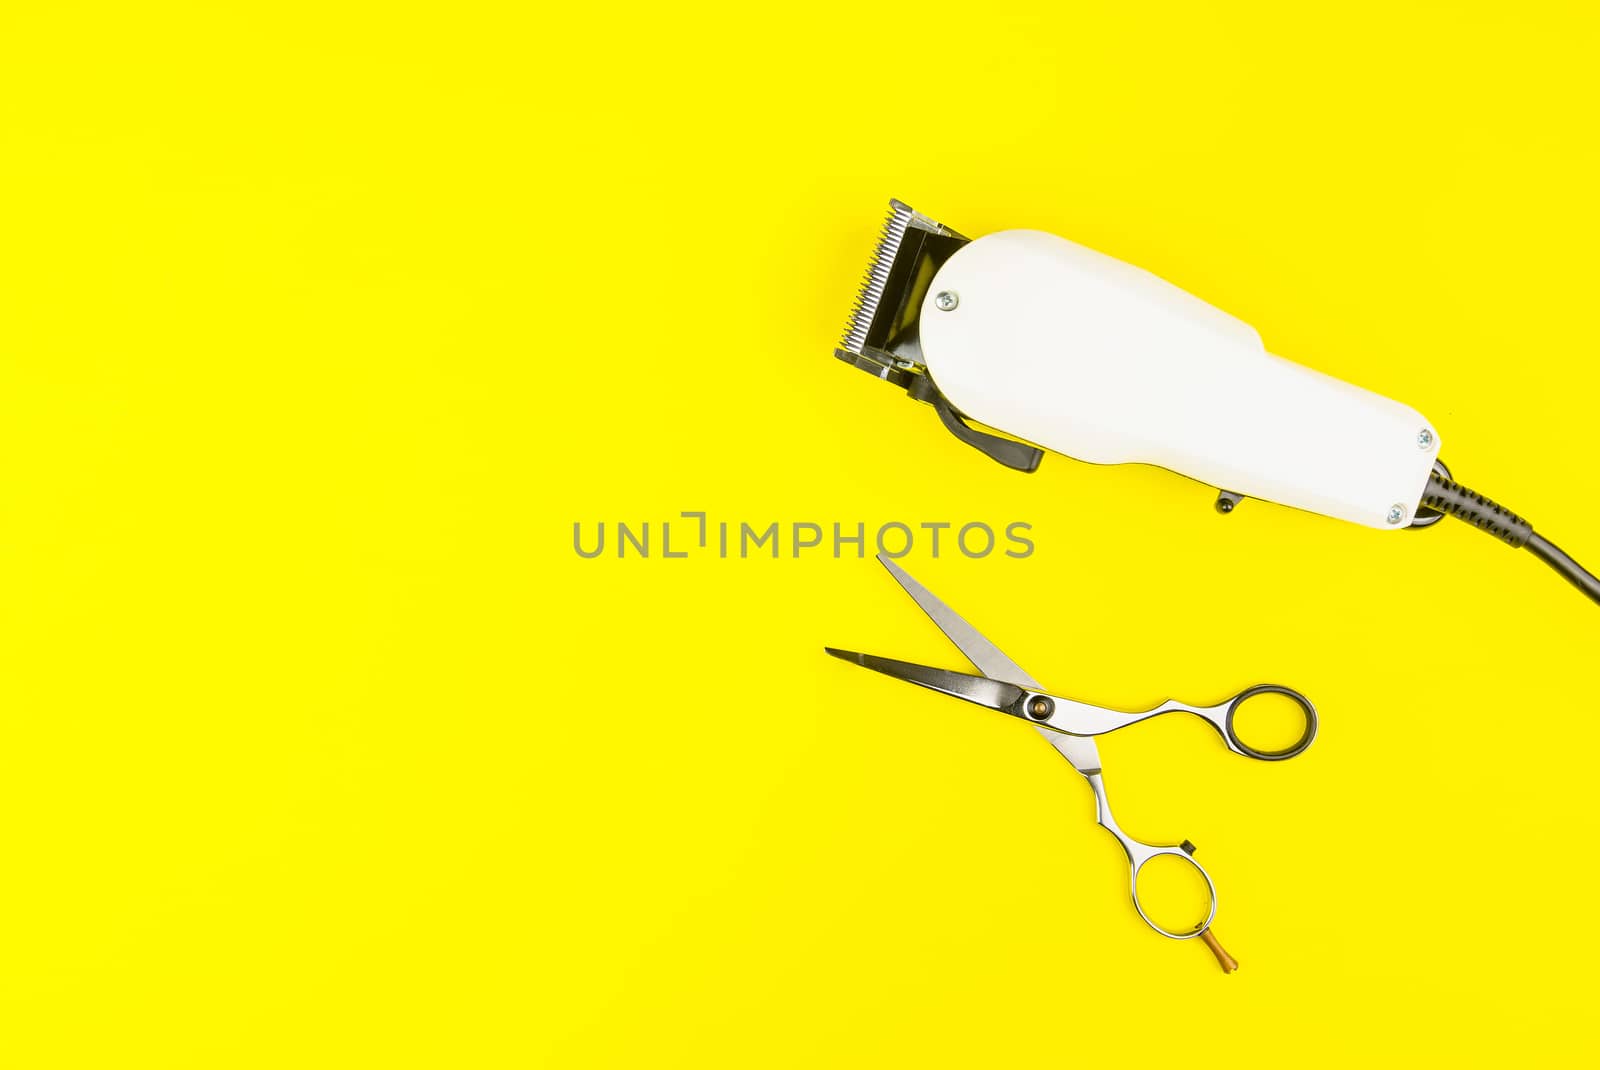 Stylish Professional Barber Scissors and White electric clippers by Bubbers